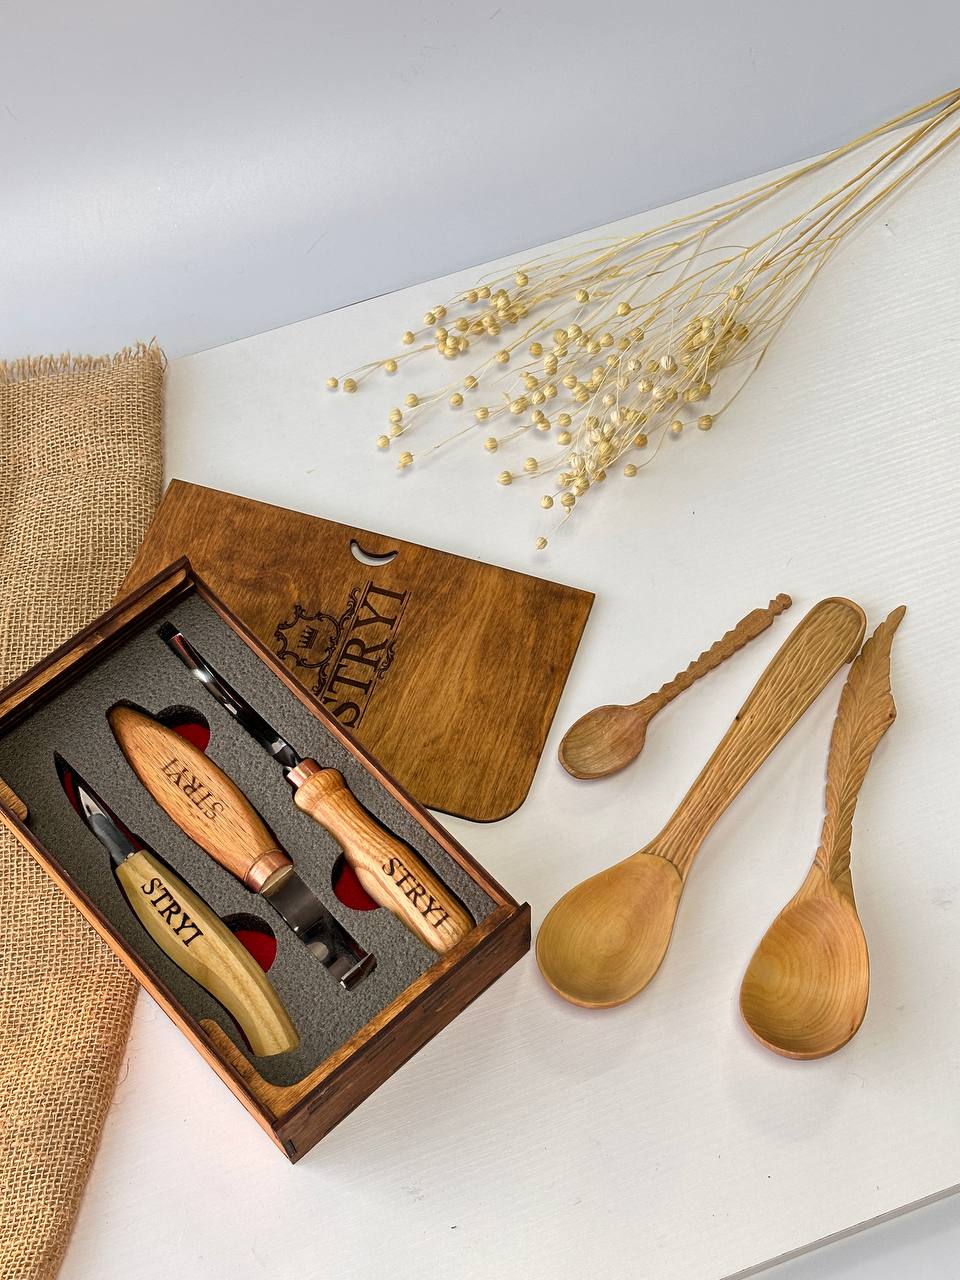 Spoon carving tools set 2pcs in wooden box, STRYI Start